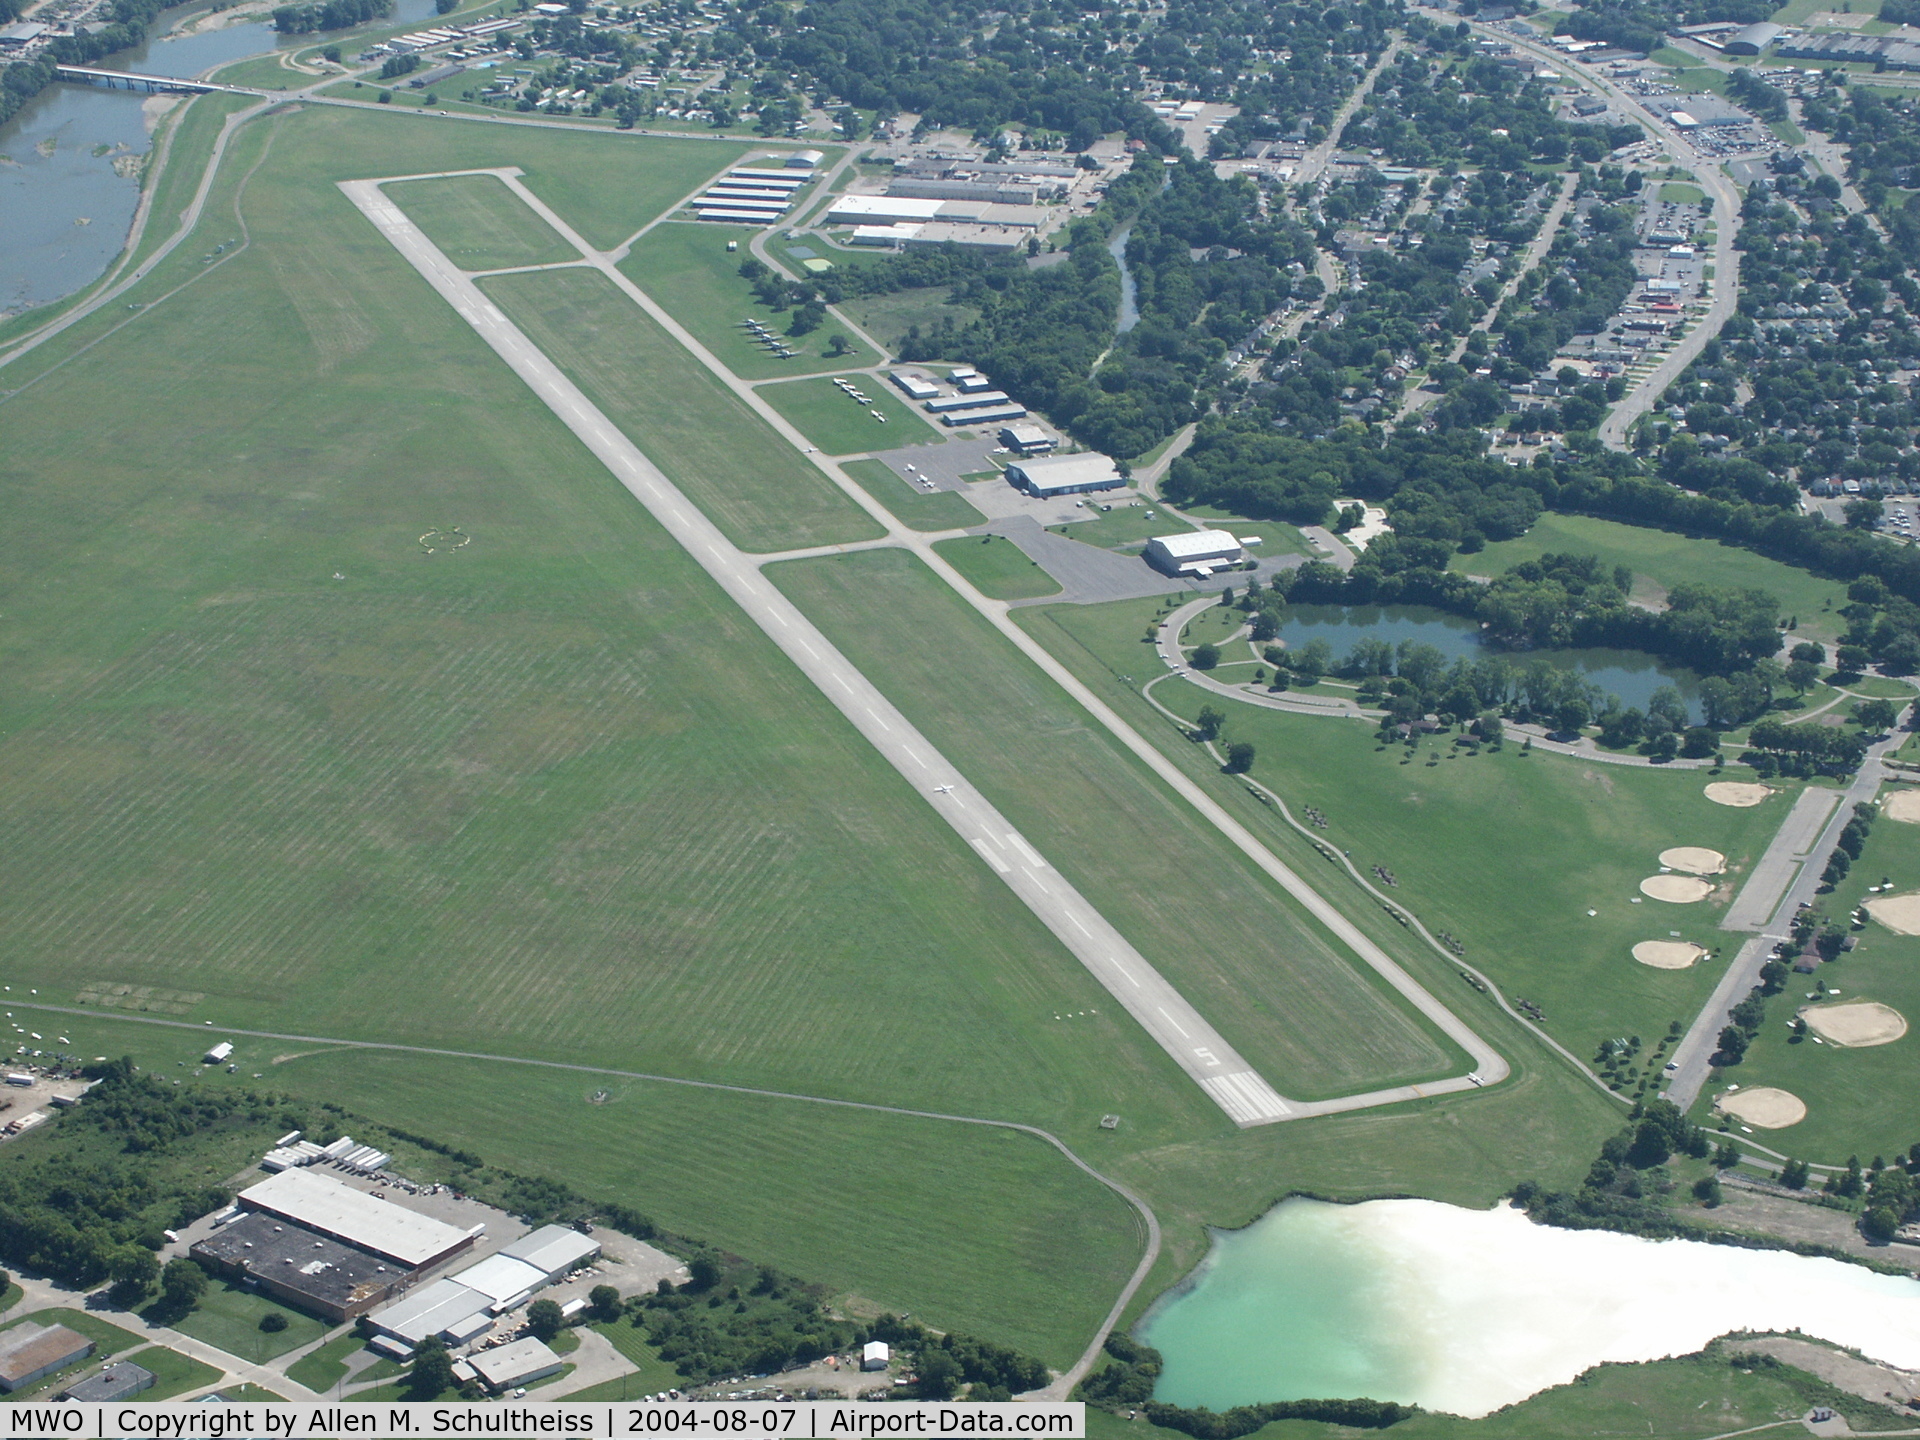 Middletown Regional/hook Field Airport (MWO) - Left Downwind for 05 / Right Downwind for 23